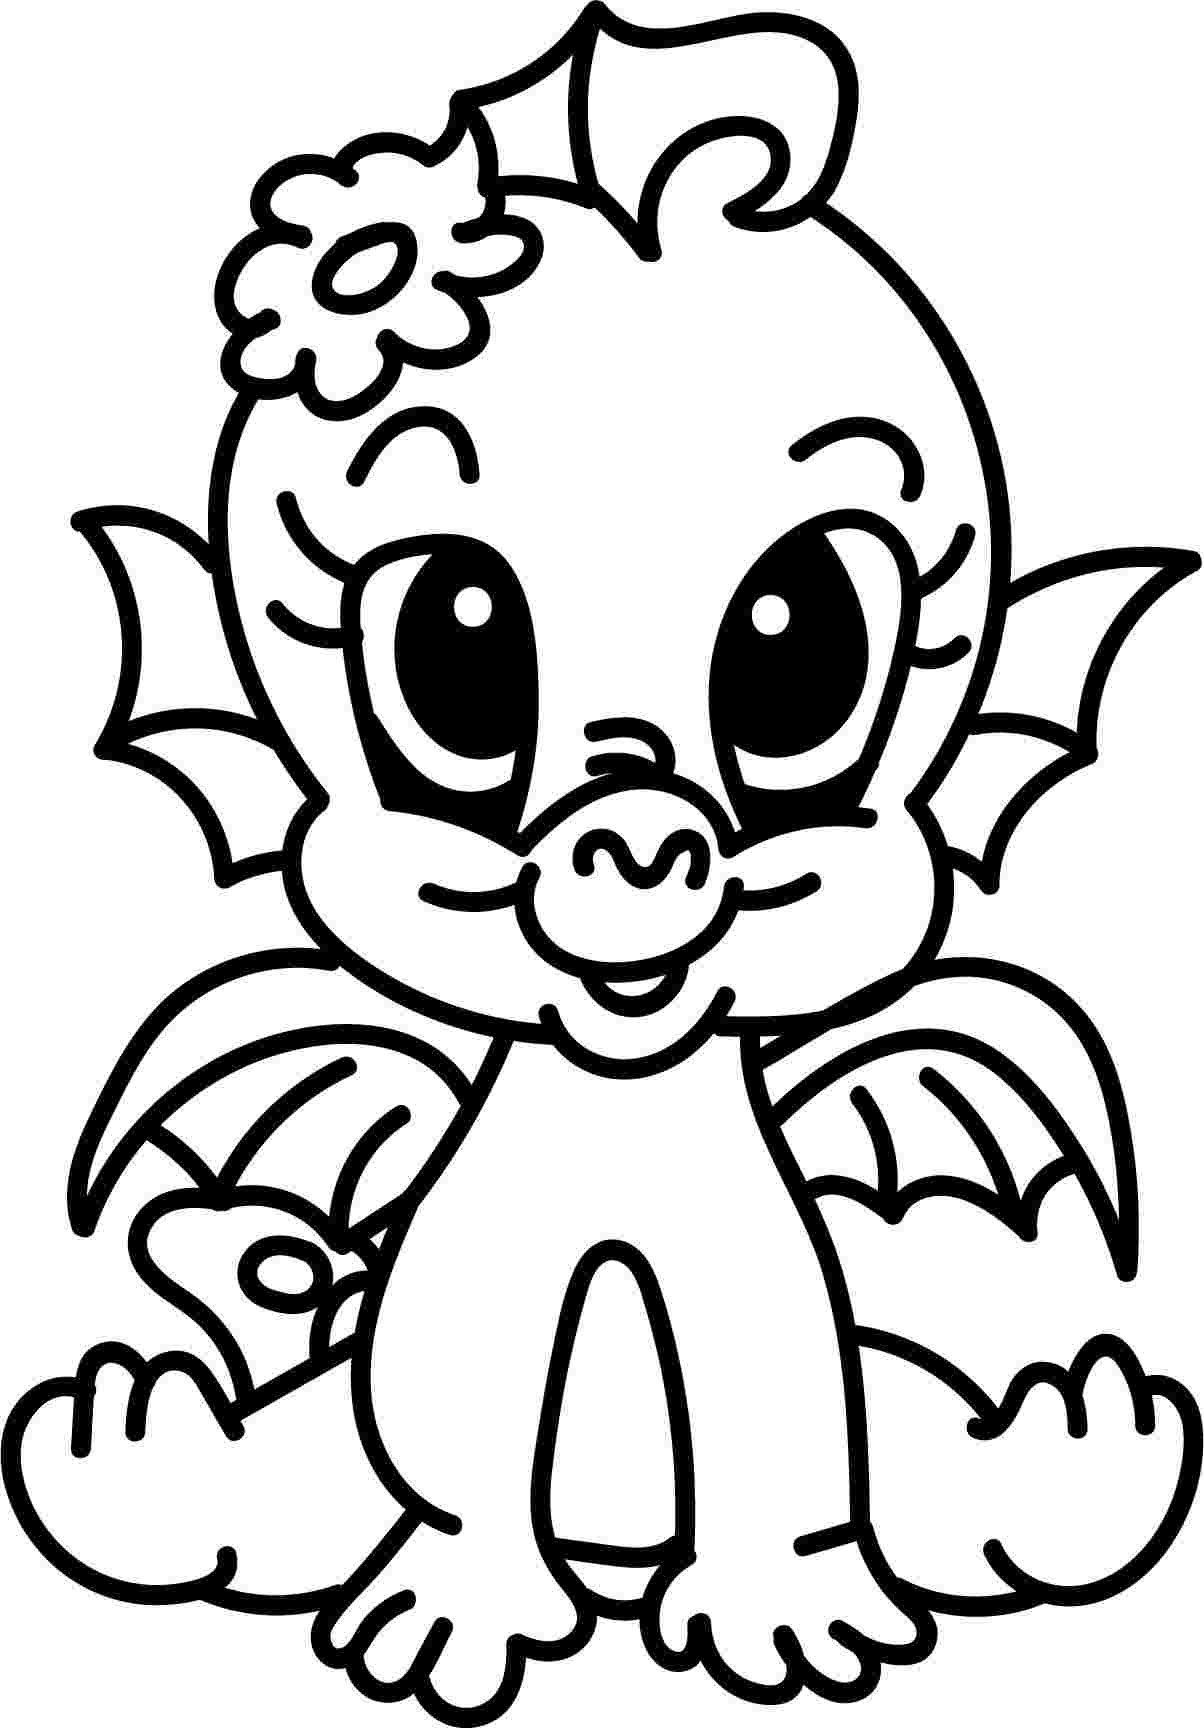 cute baby dragon coloring pages girly